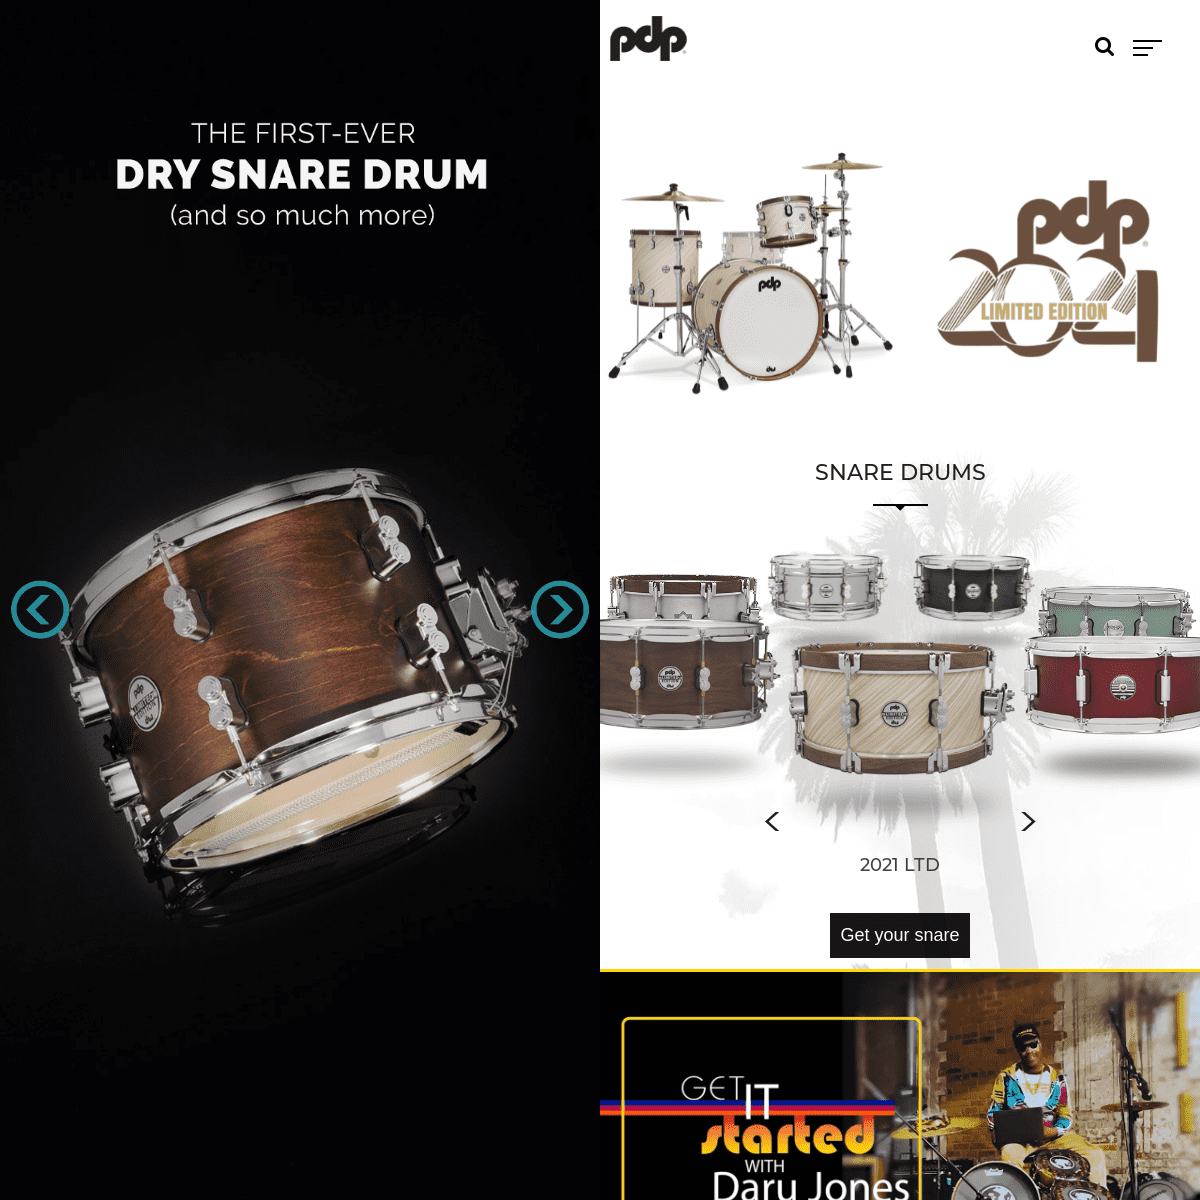 A complete backup of https://pacificdrums.com